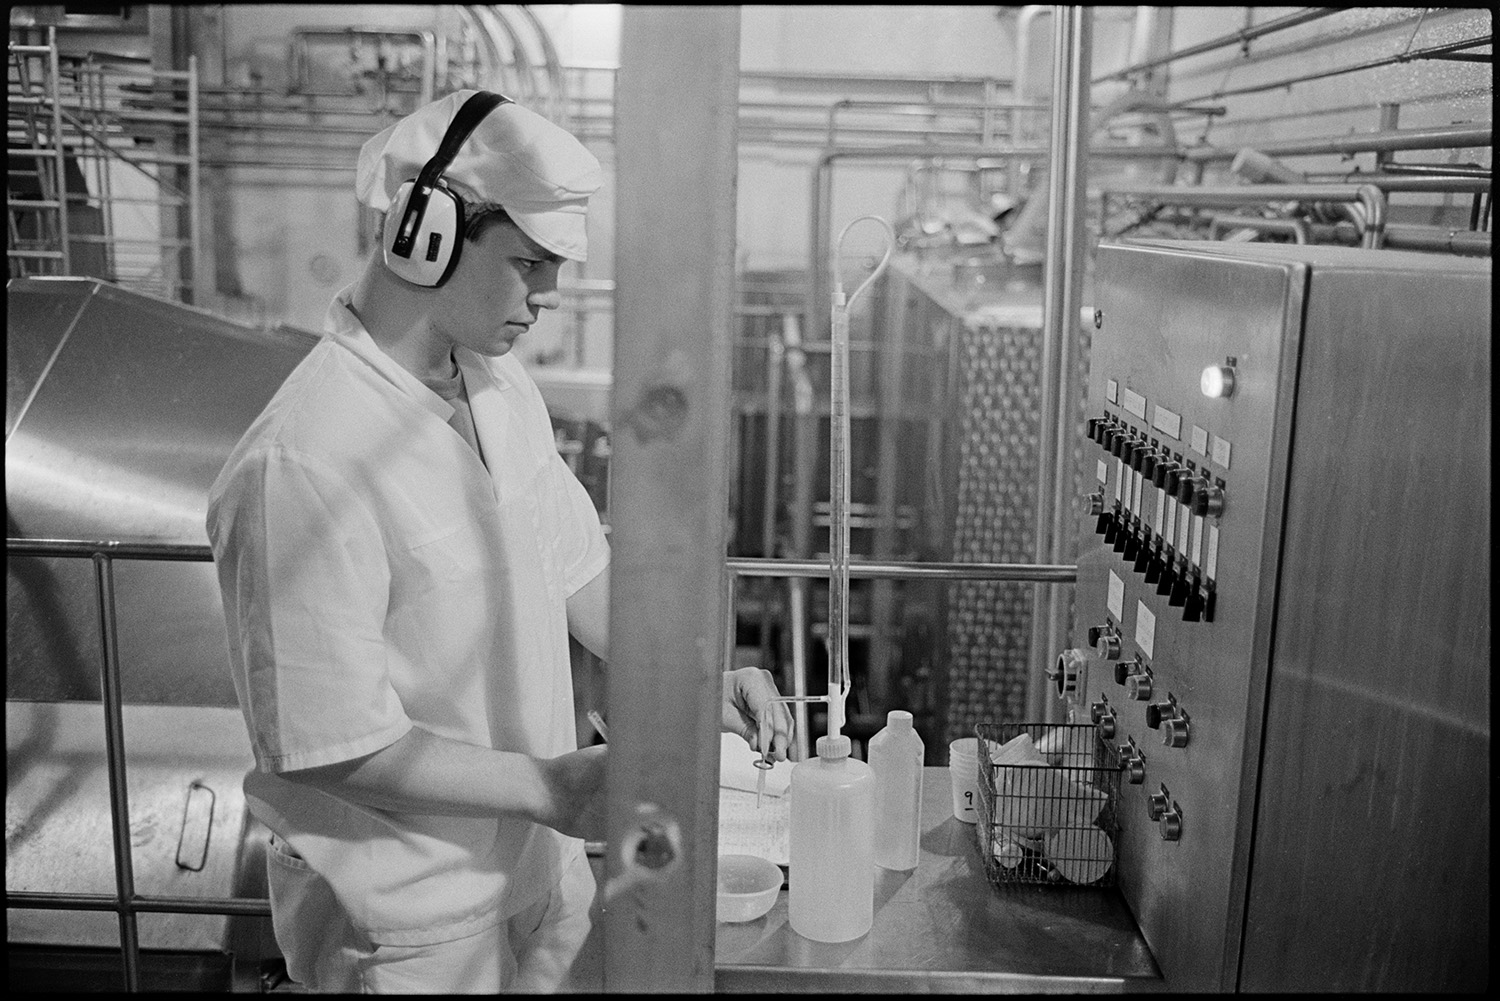 Men working in cheese factory. 
[A man testing cheese at the Dairy Crest North Tawton Cheese Factory. He is wearing ear defenders.]